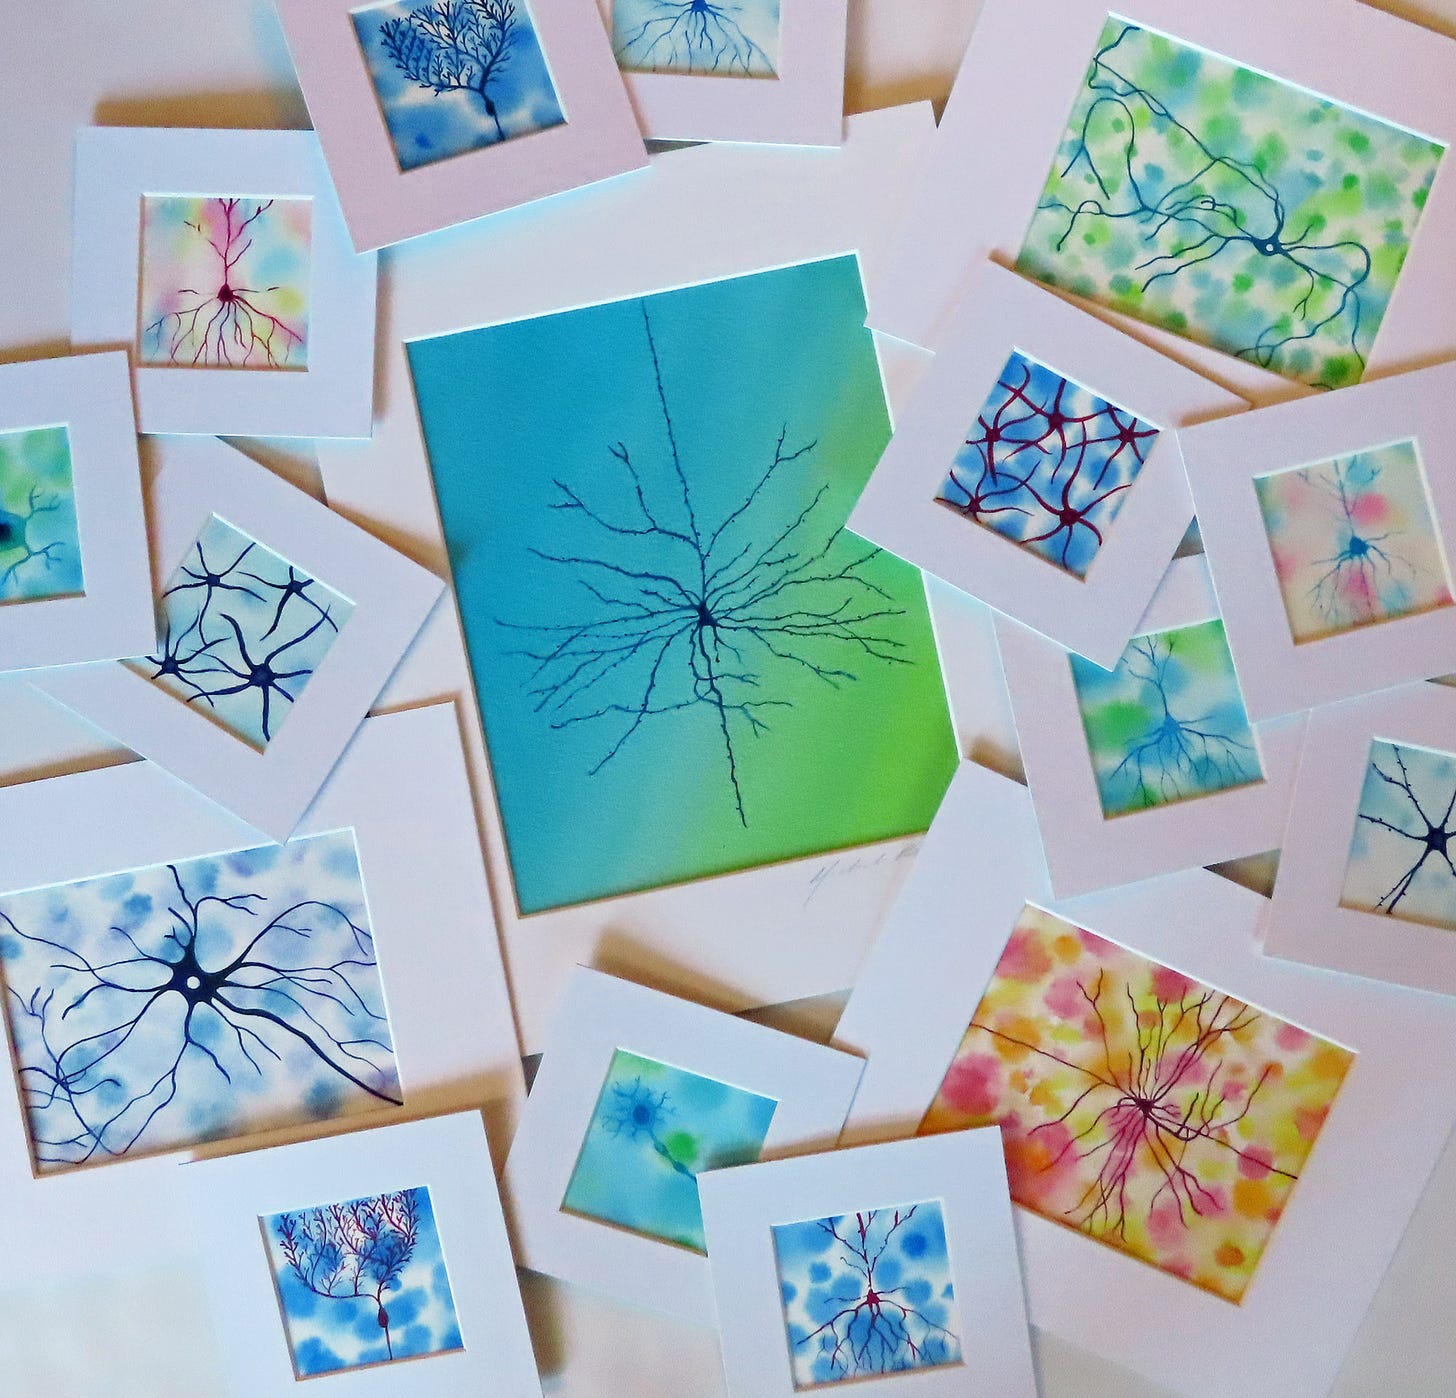 watercolor neuron paintings spread on a table